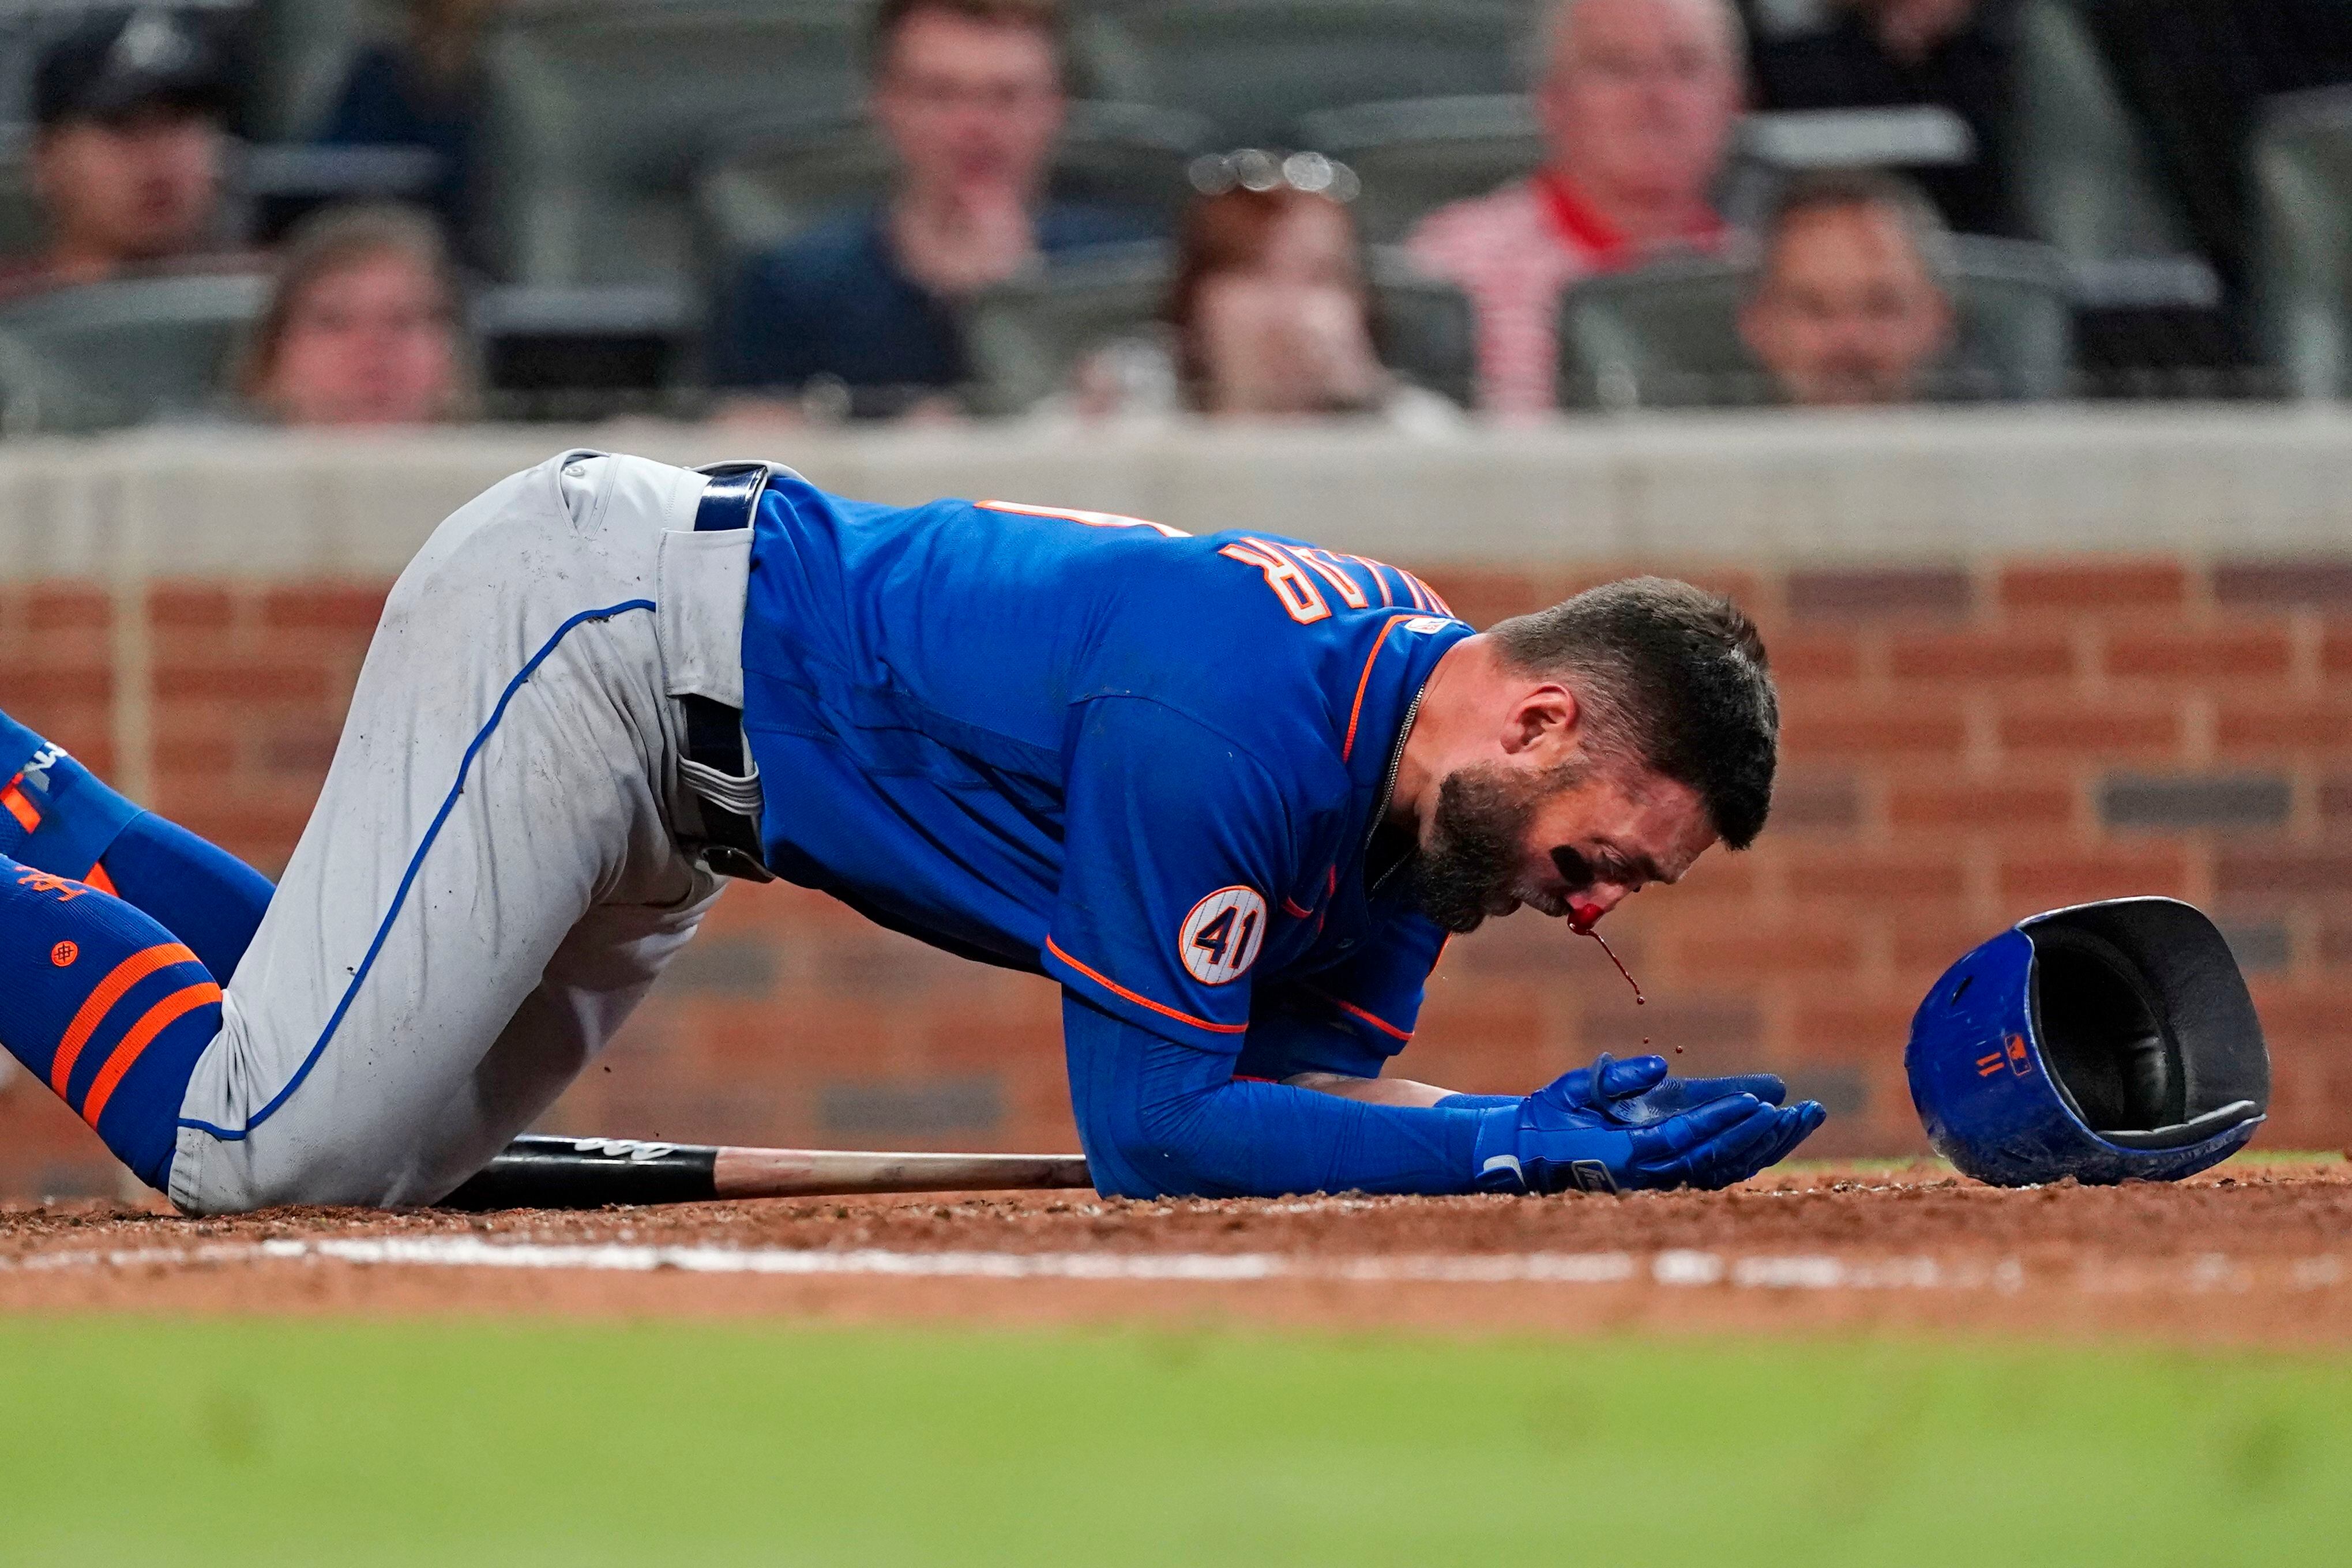 Kevin Pillar injury update: Mets OF suffered multiple nasal fractures